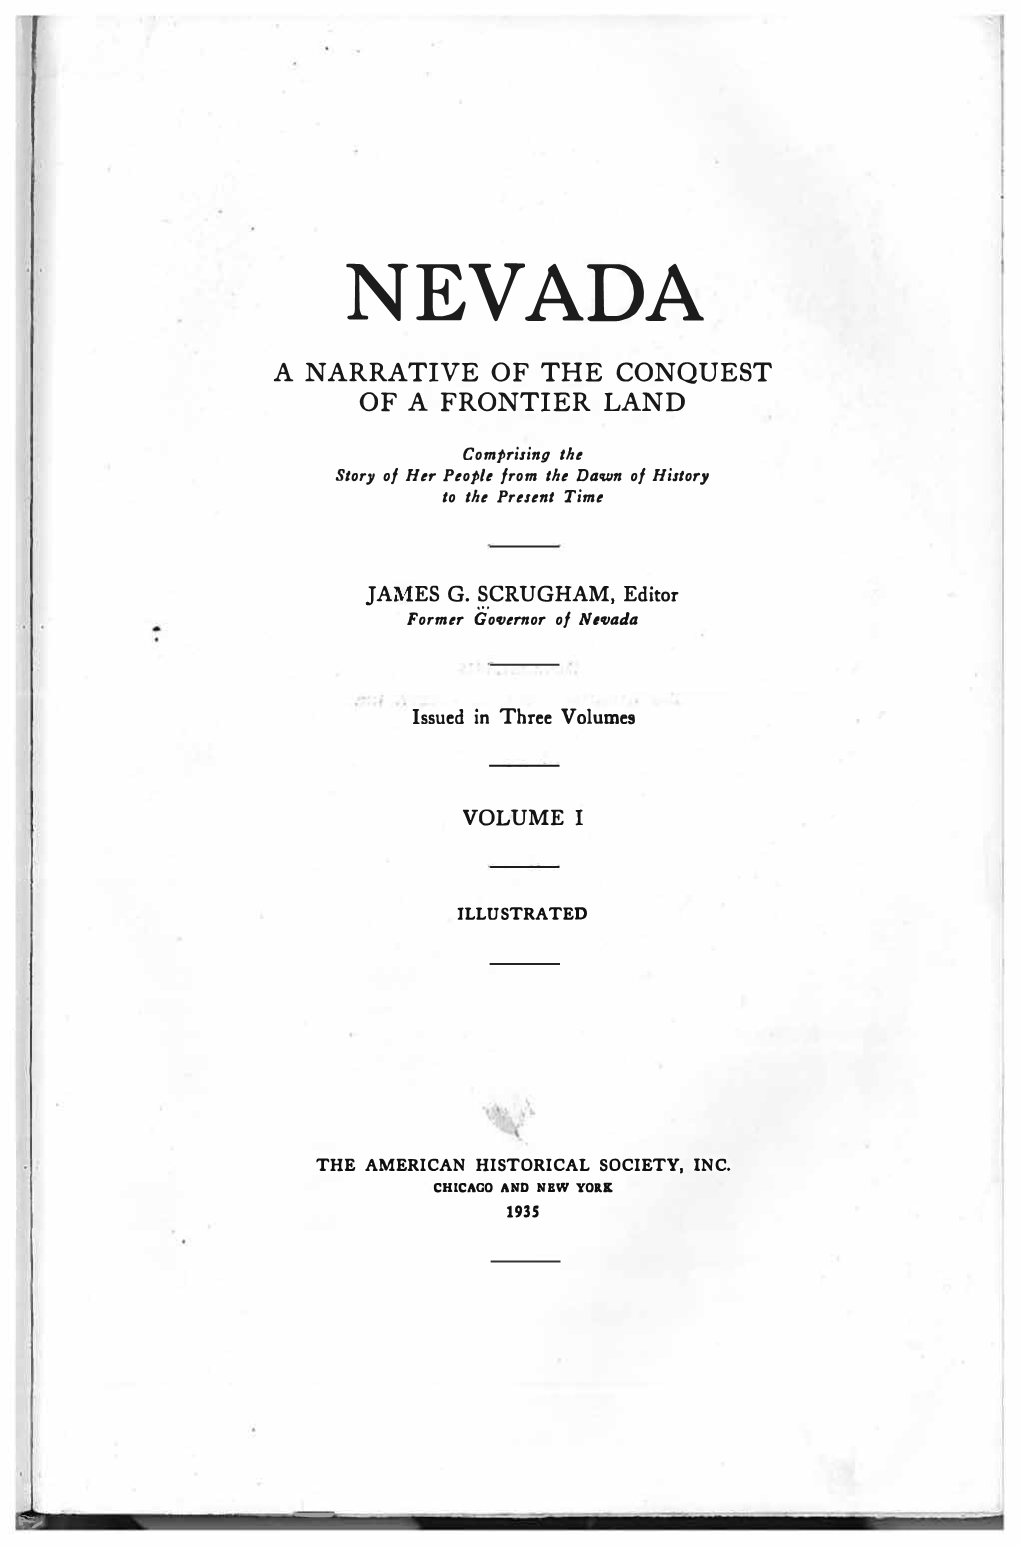 Nevada a Narrative of the Conquest of a Frontier Land